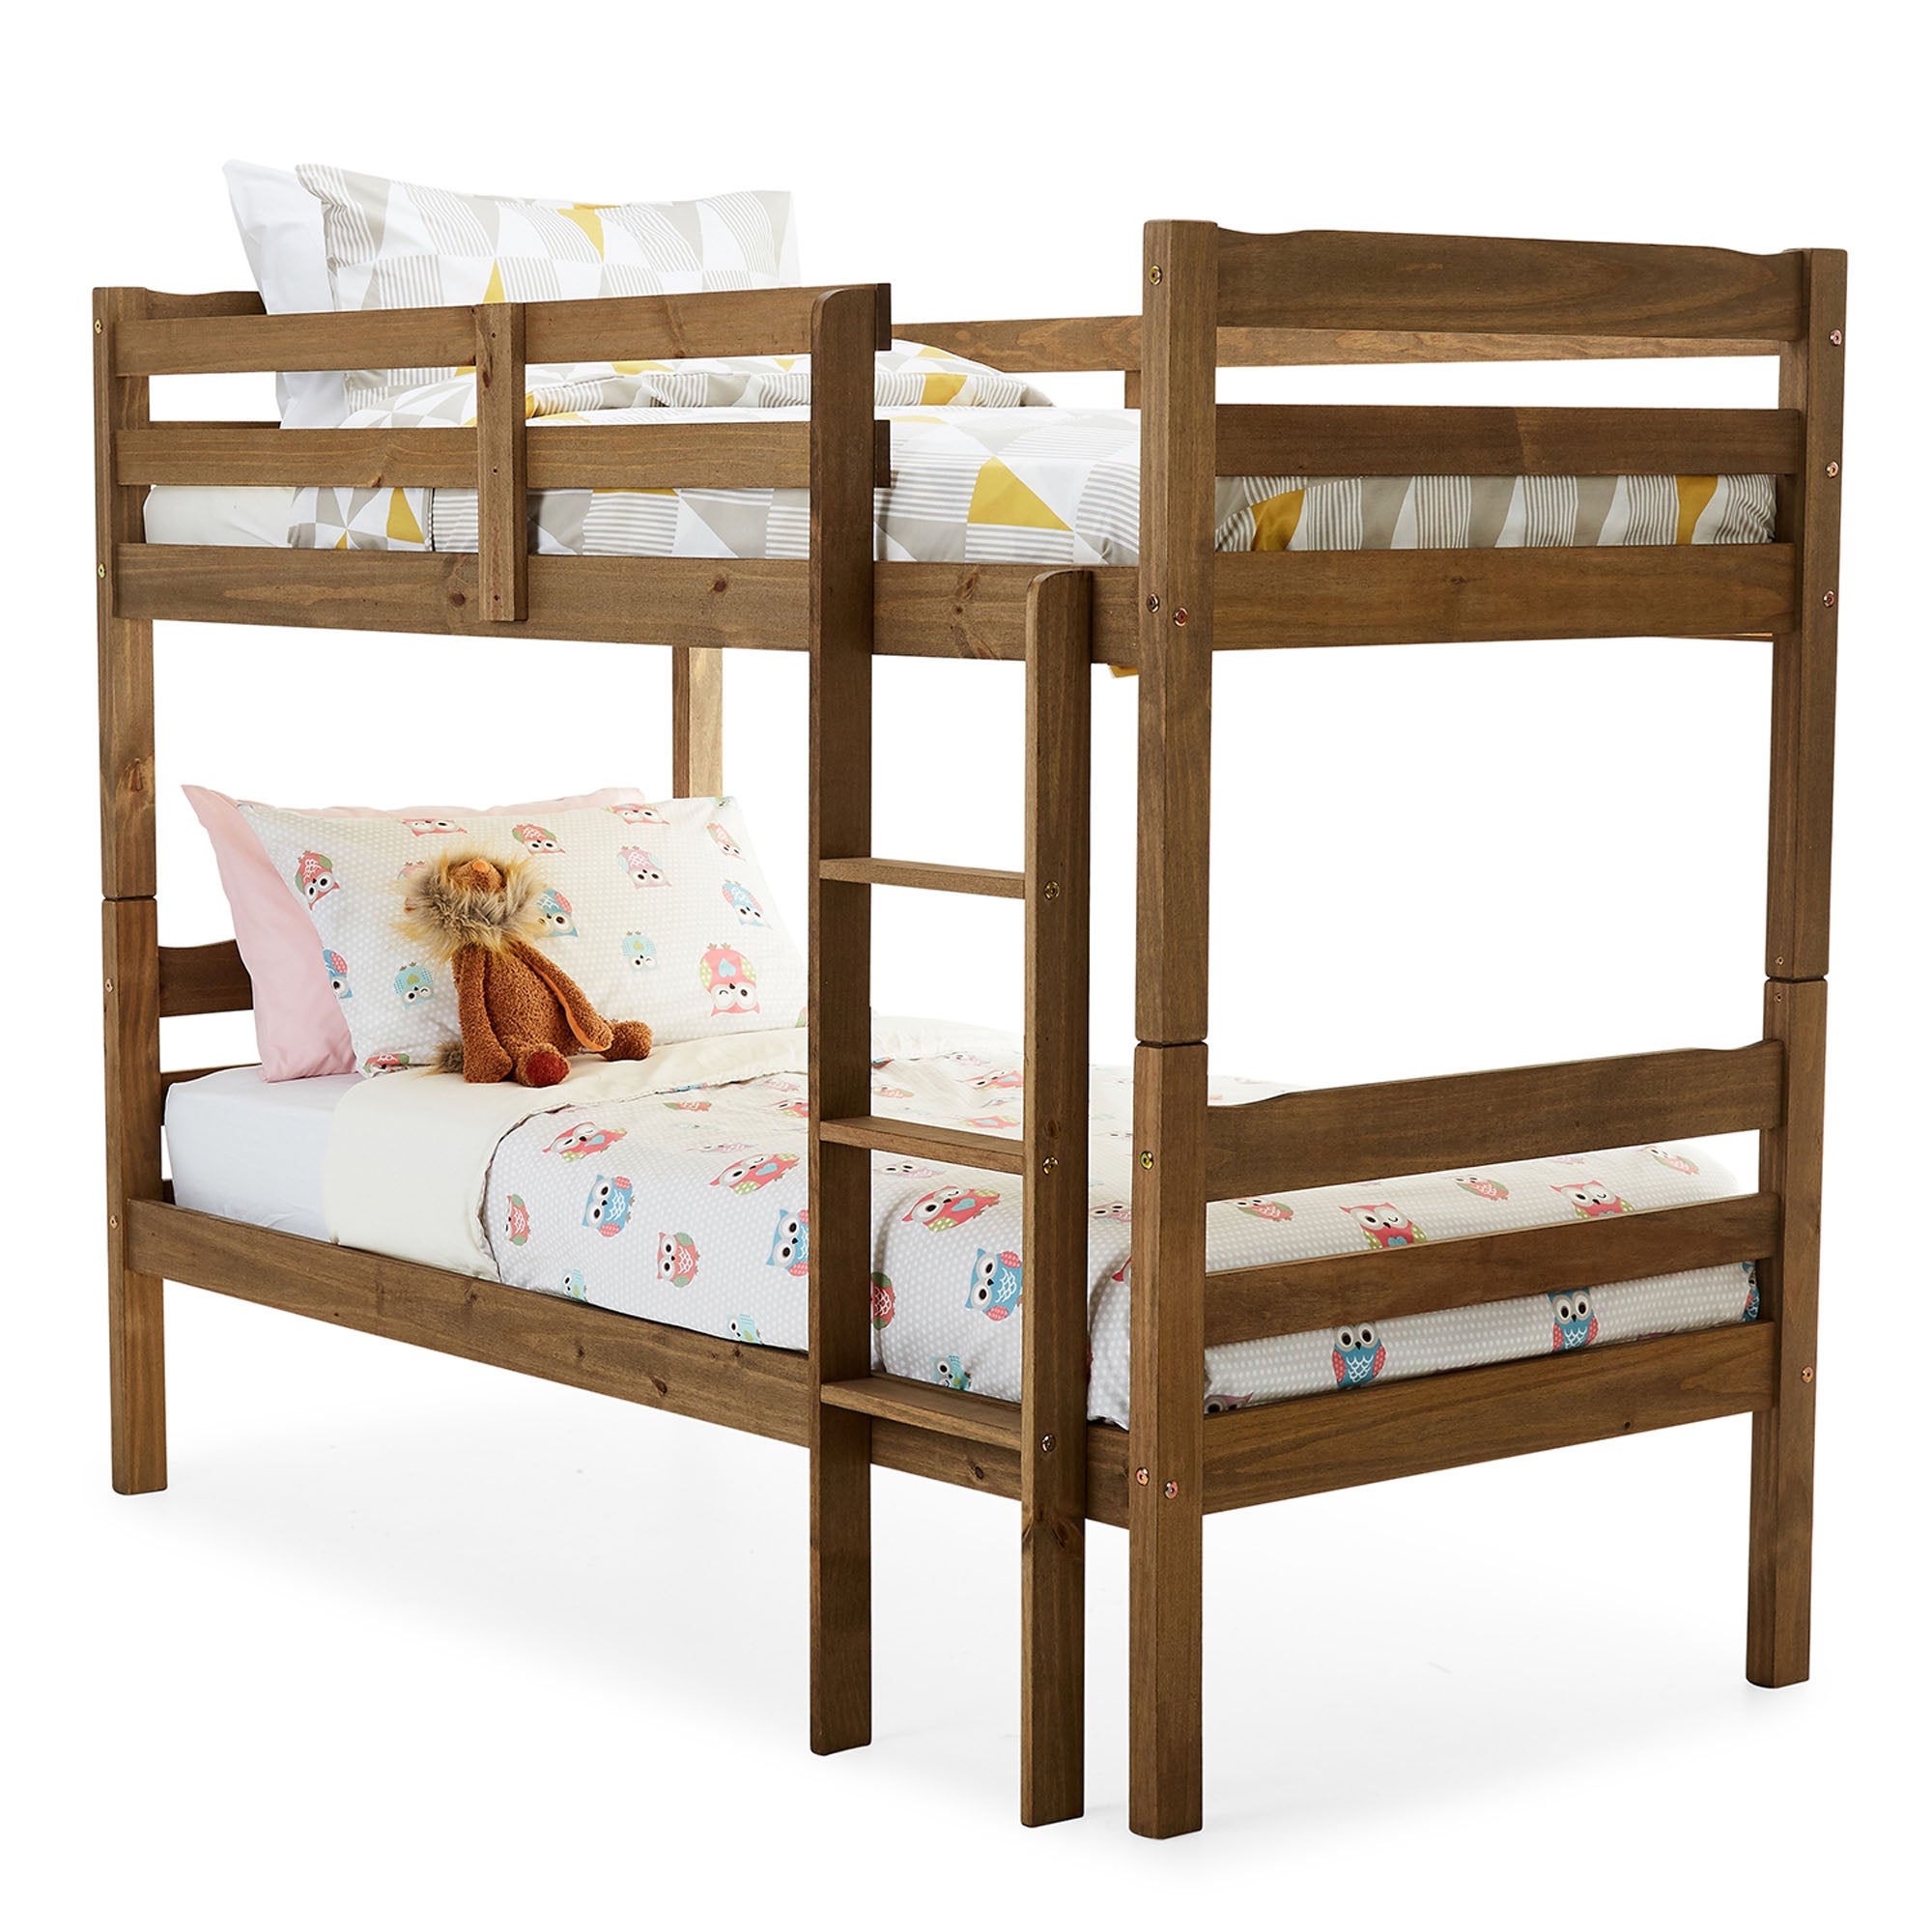 Panama Wooden Bunk Bed Frame